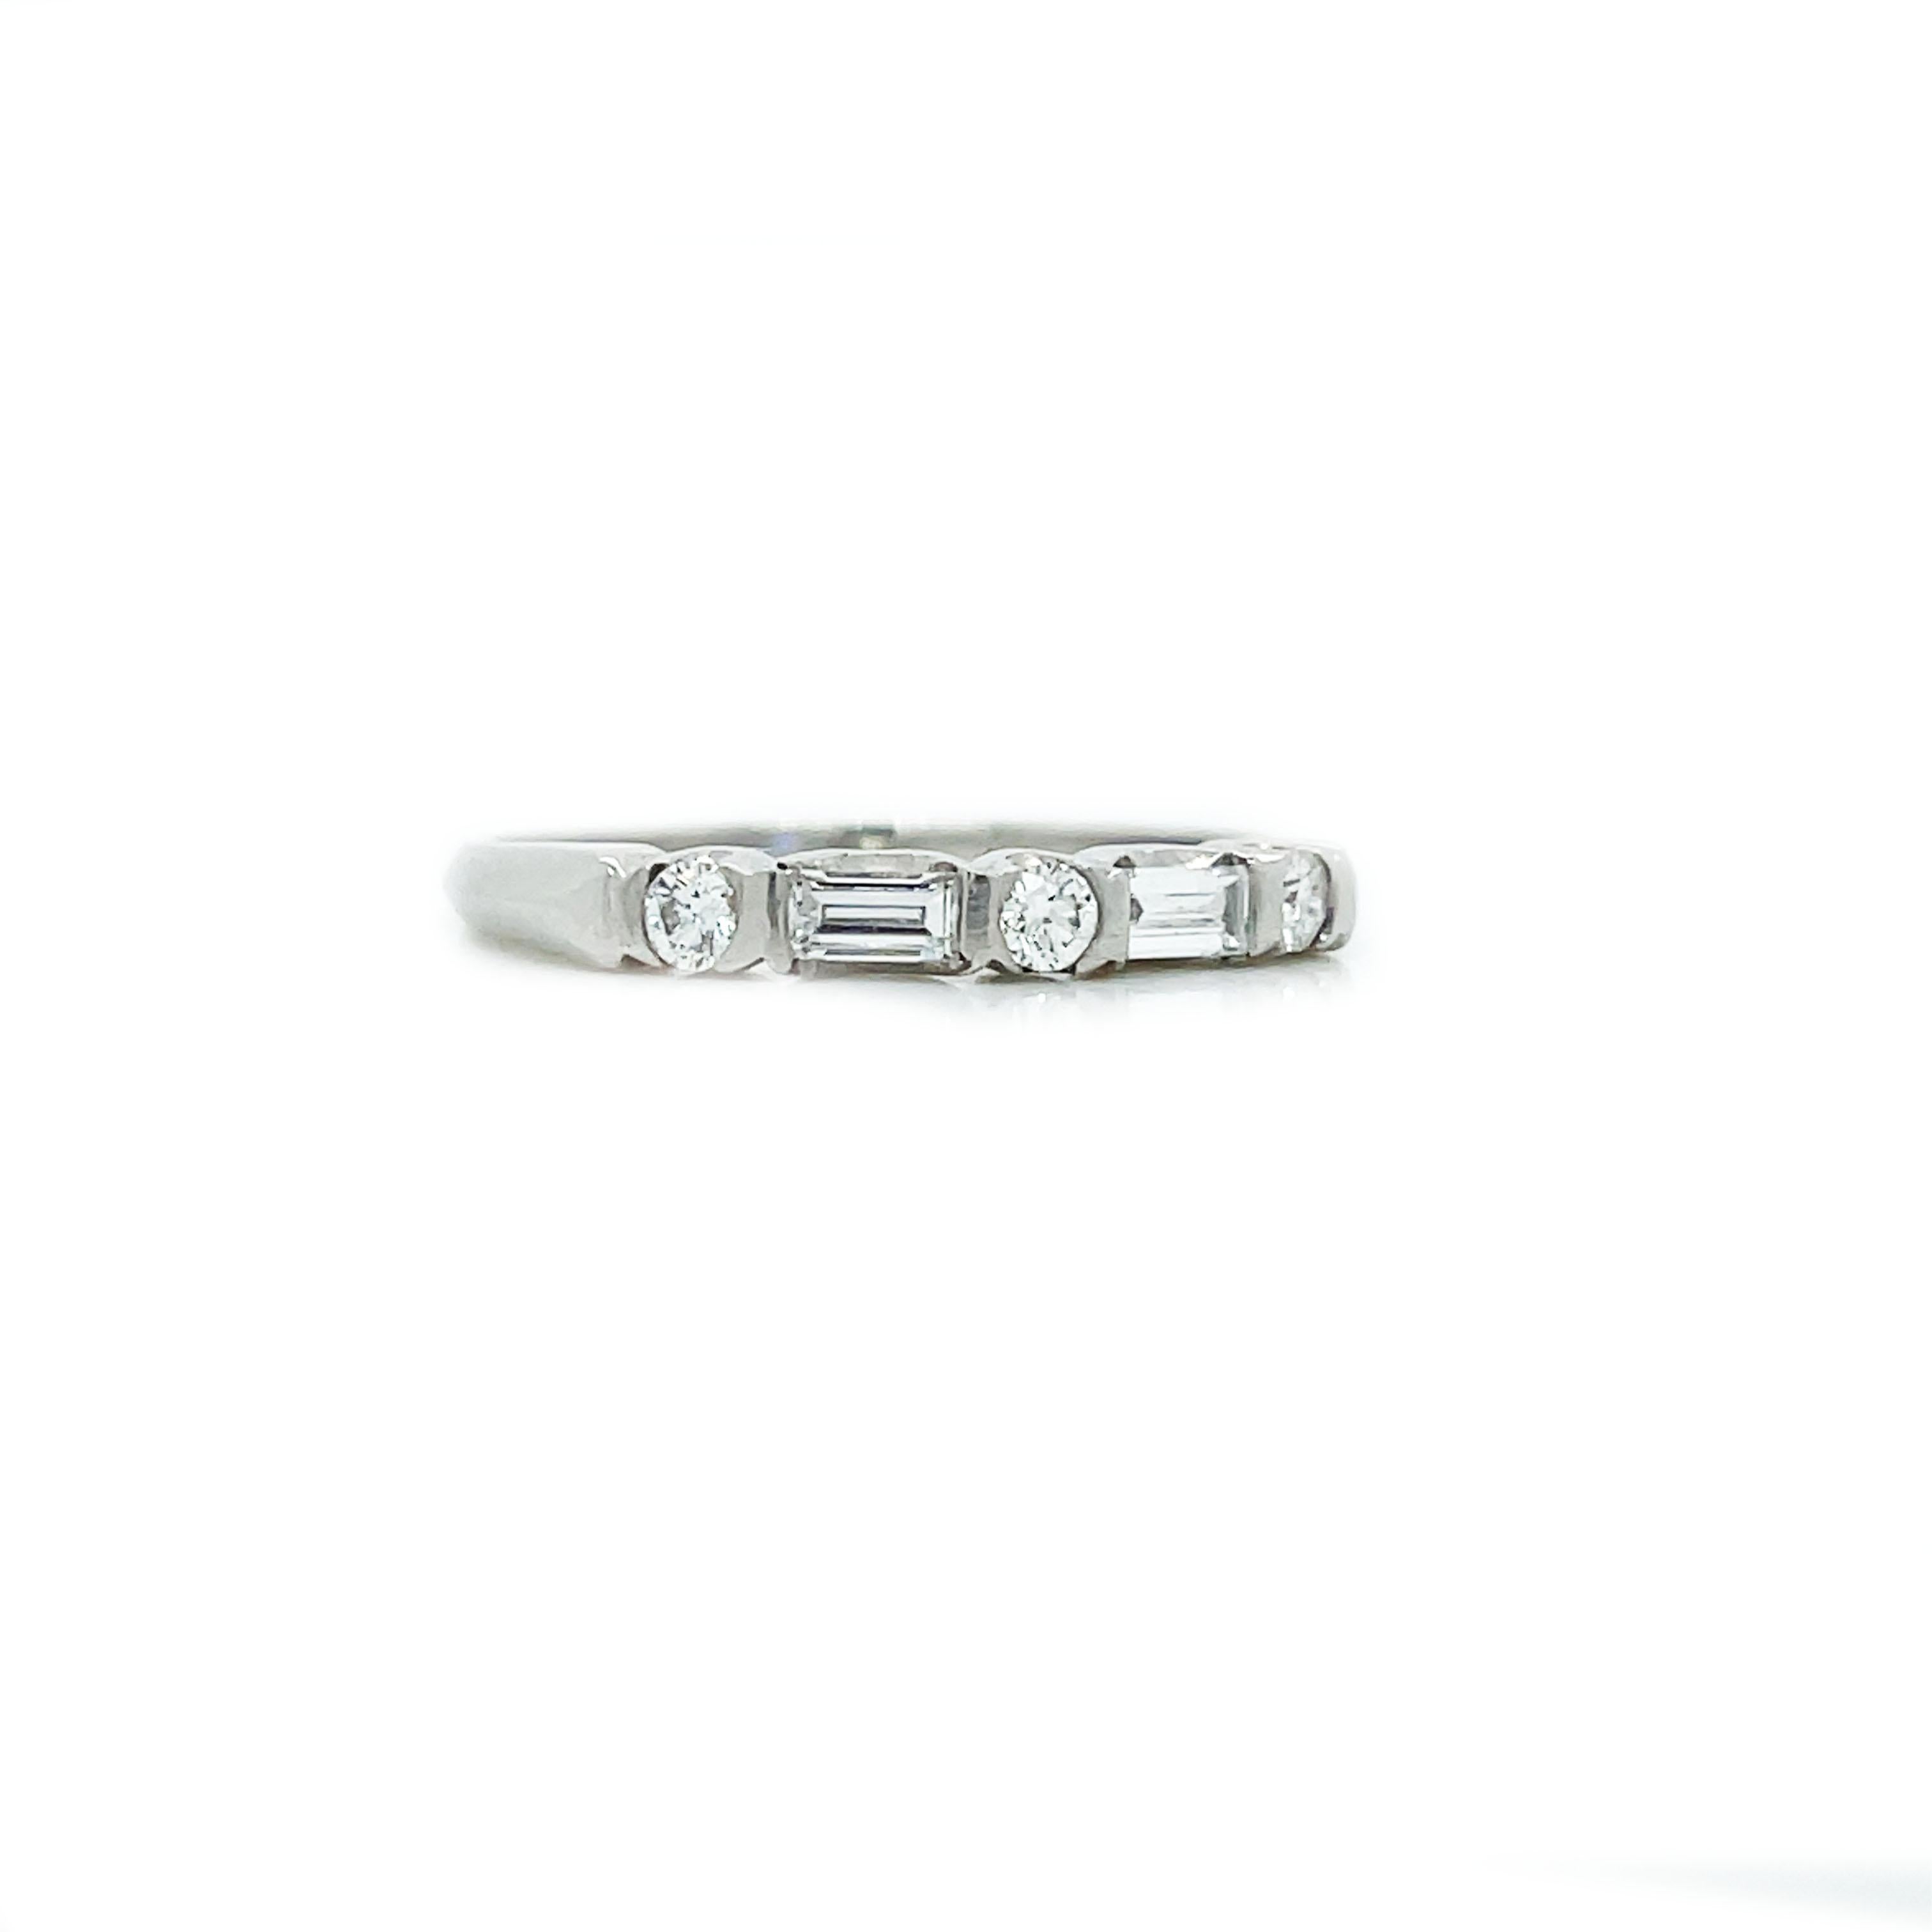 This is an elegant 1925 Art Deco platinum band showcasing a gleaming combination of round and baguette cut diamonds! This classic platinum ring is sleek and refined, alternately sparkling and gleaming with bright-white round and baguette diamonds.